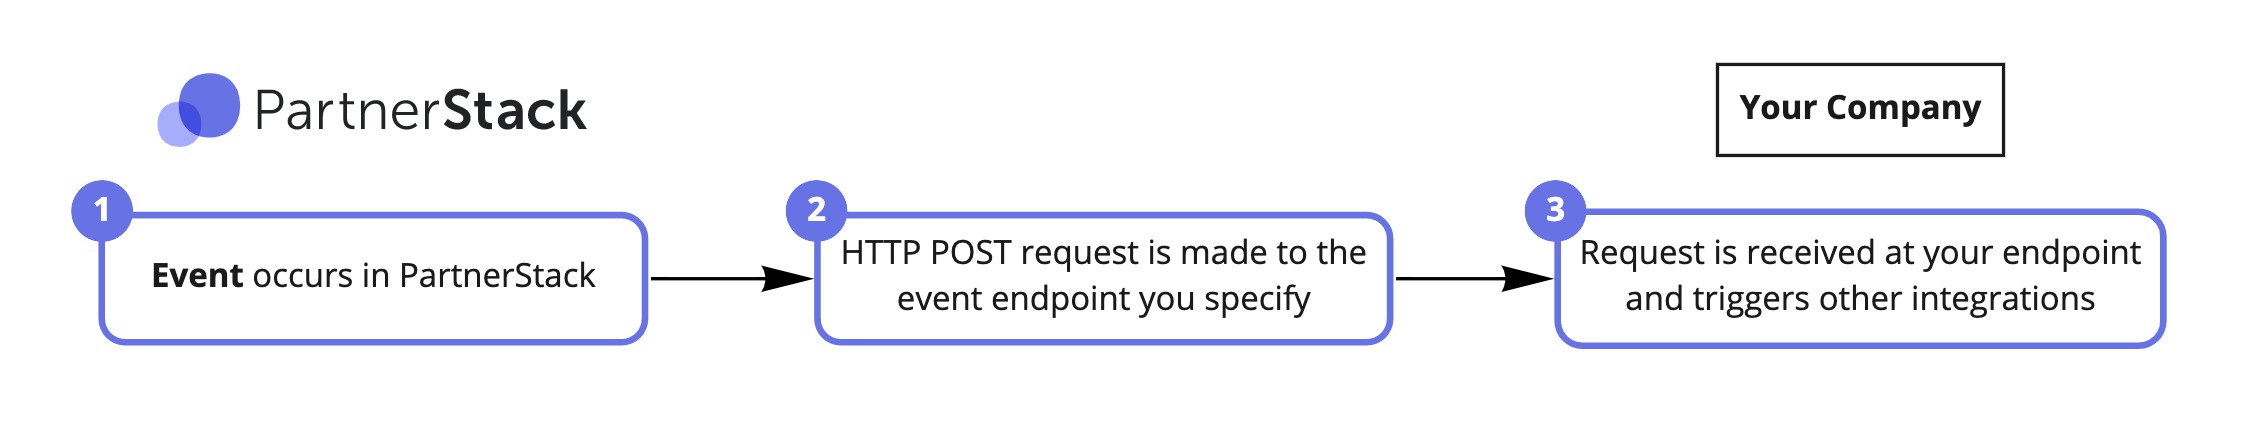 First, an event occurs in PartnerStack. Then, PartnerStack makes an HTTP POST request at the event endpoint you specify. Once this is received, you can use the information in the event payload to kick off other integrations!